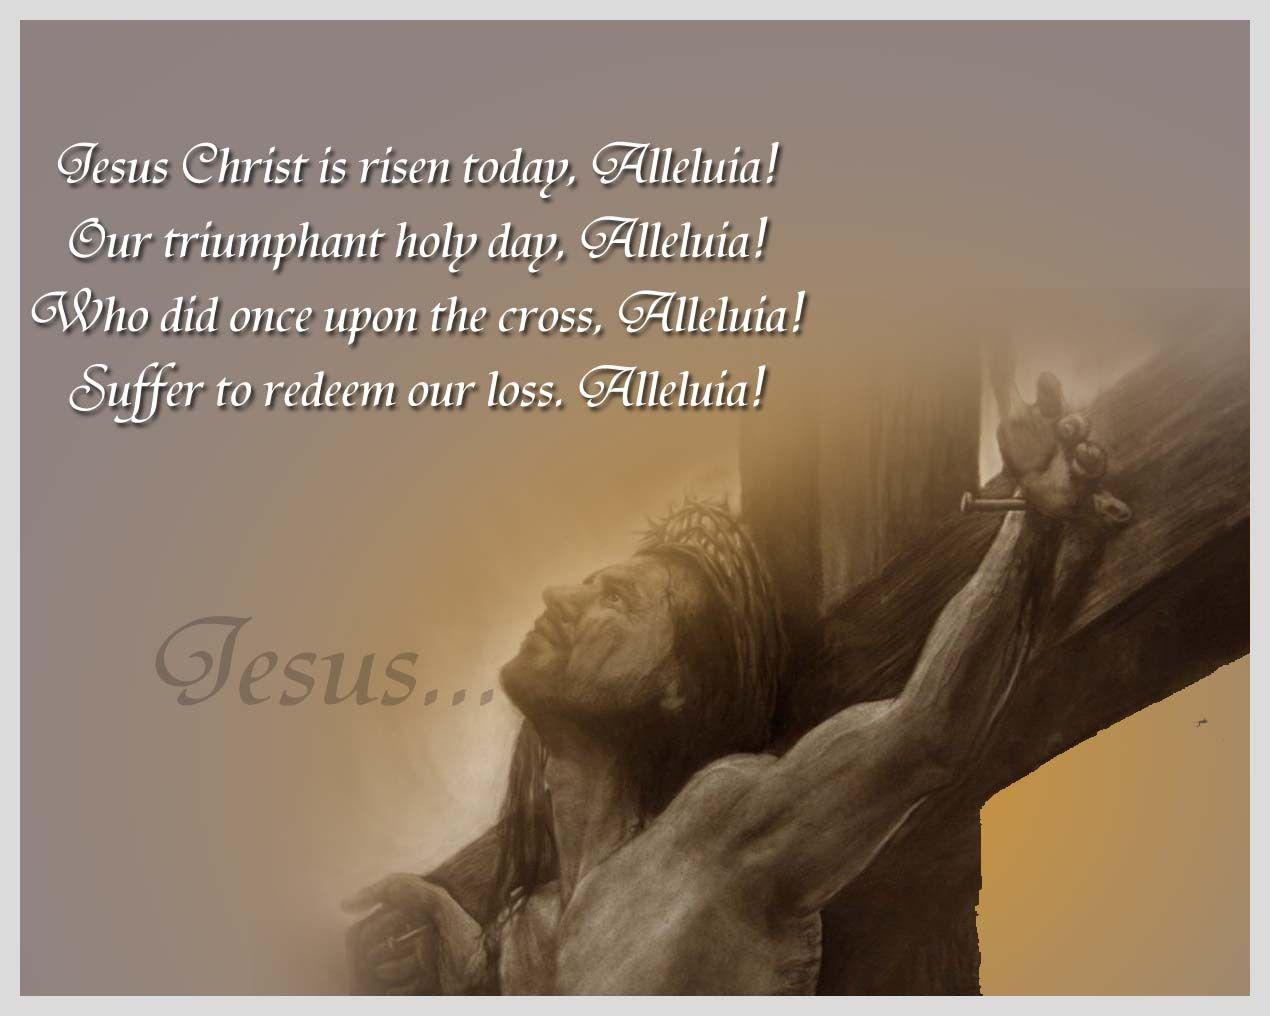 Good Friday 2014 SMS, Quotes, Wishes, Sayings, Text Messages